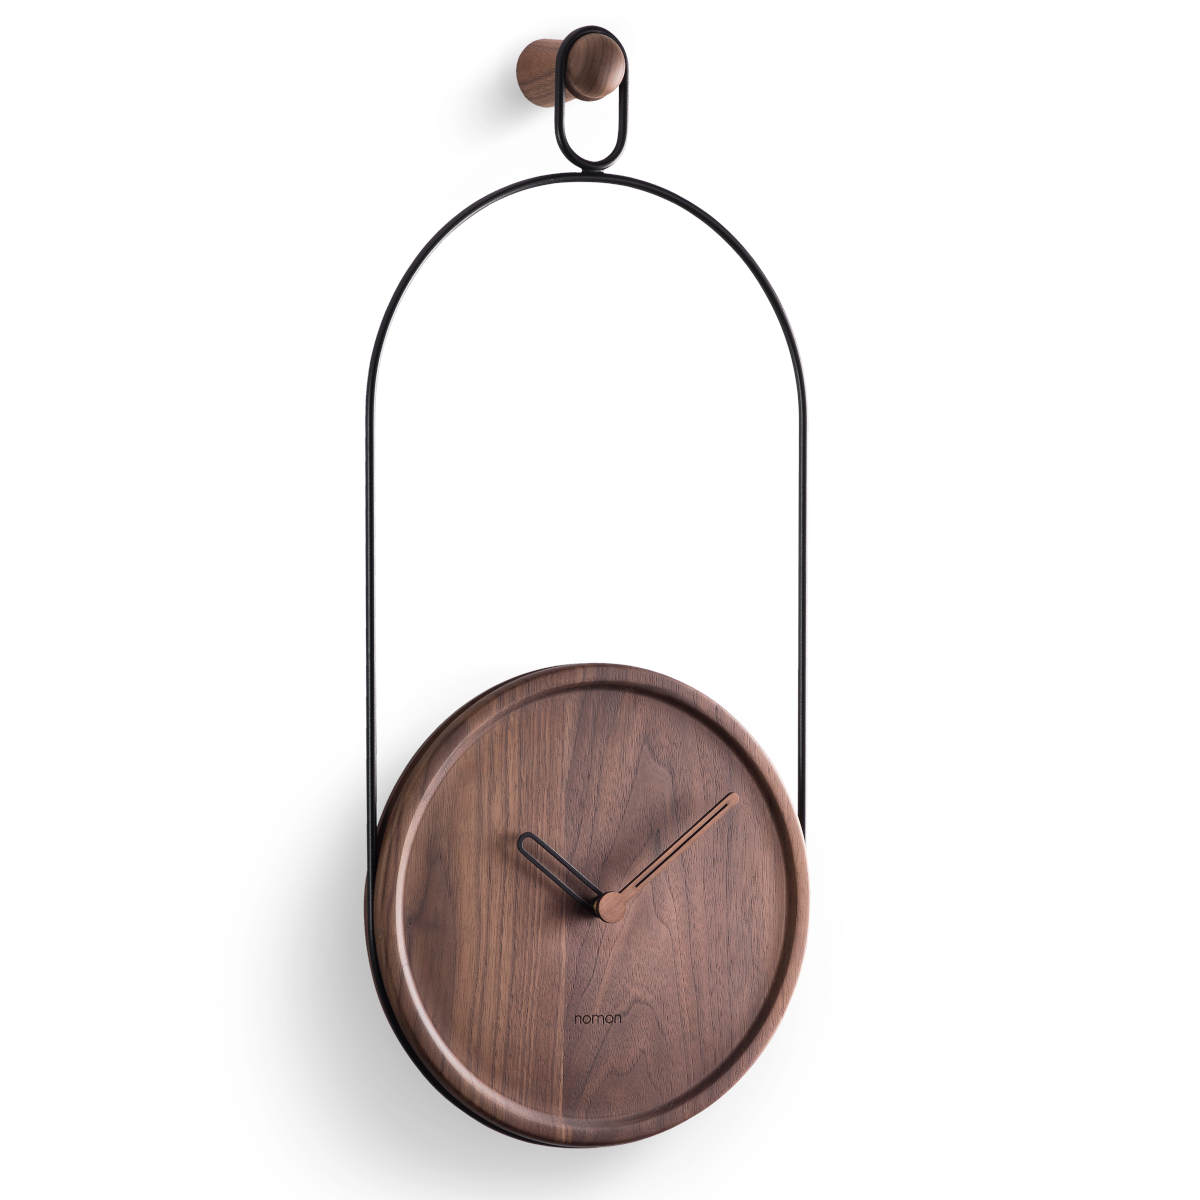 Suspended wall clock made of walnut wood